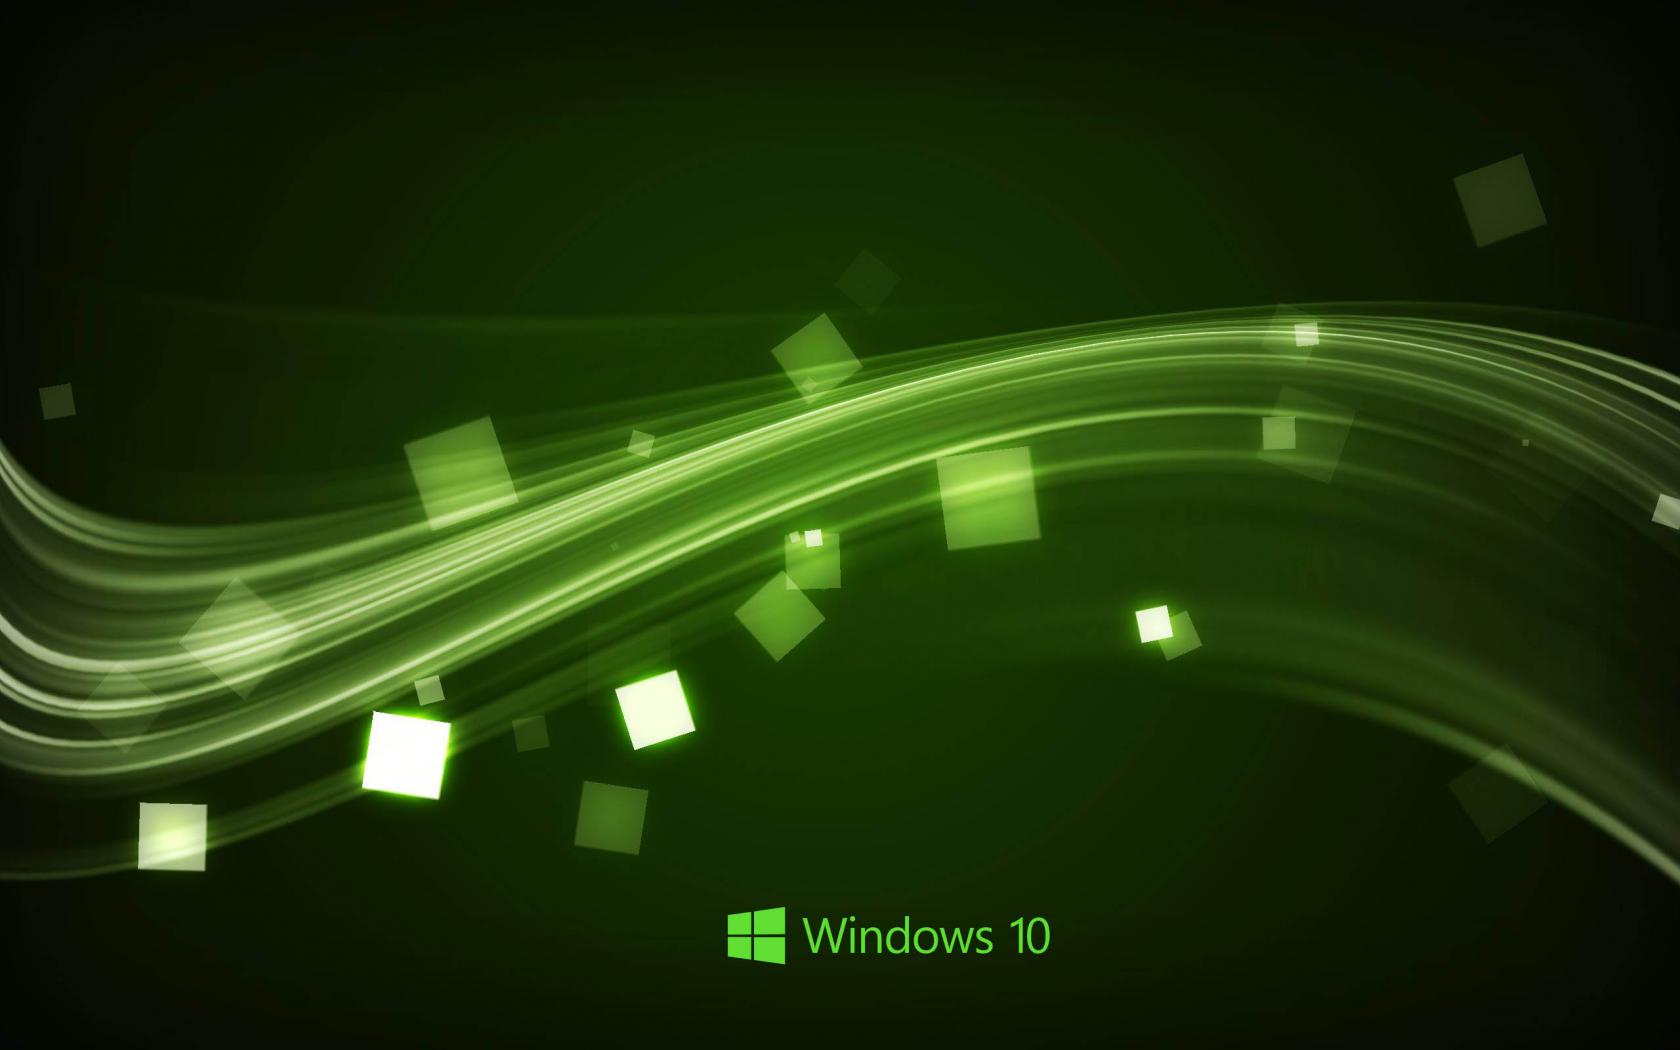 Windows 10 Wallpaper in Abstract Green Waves HD Wallpapers for Free